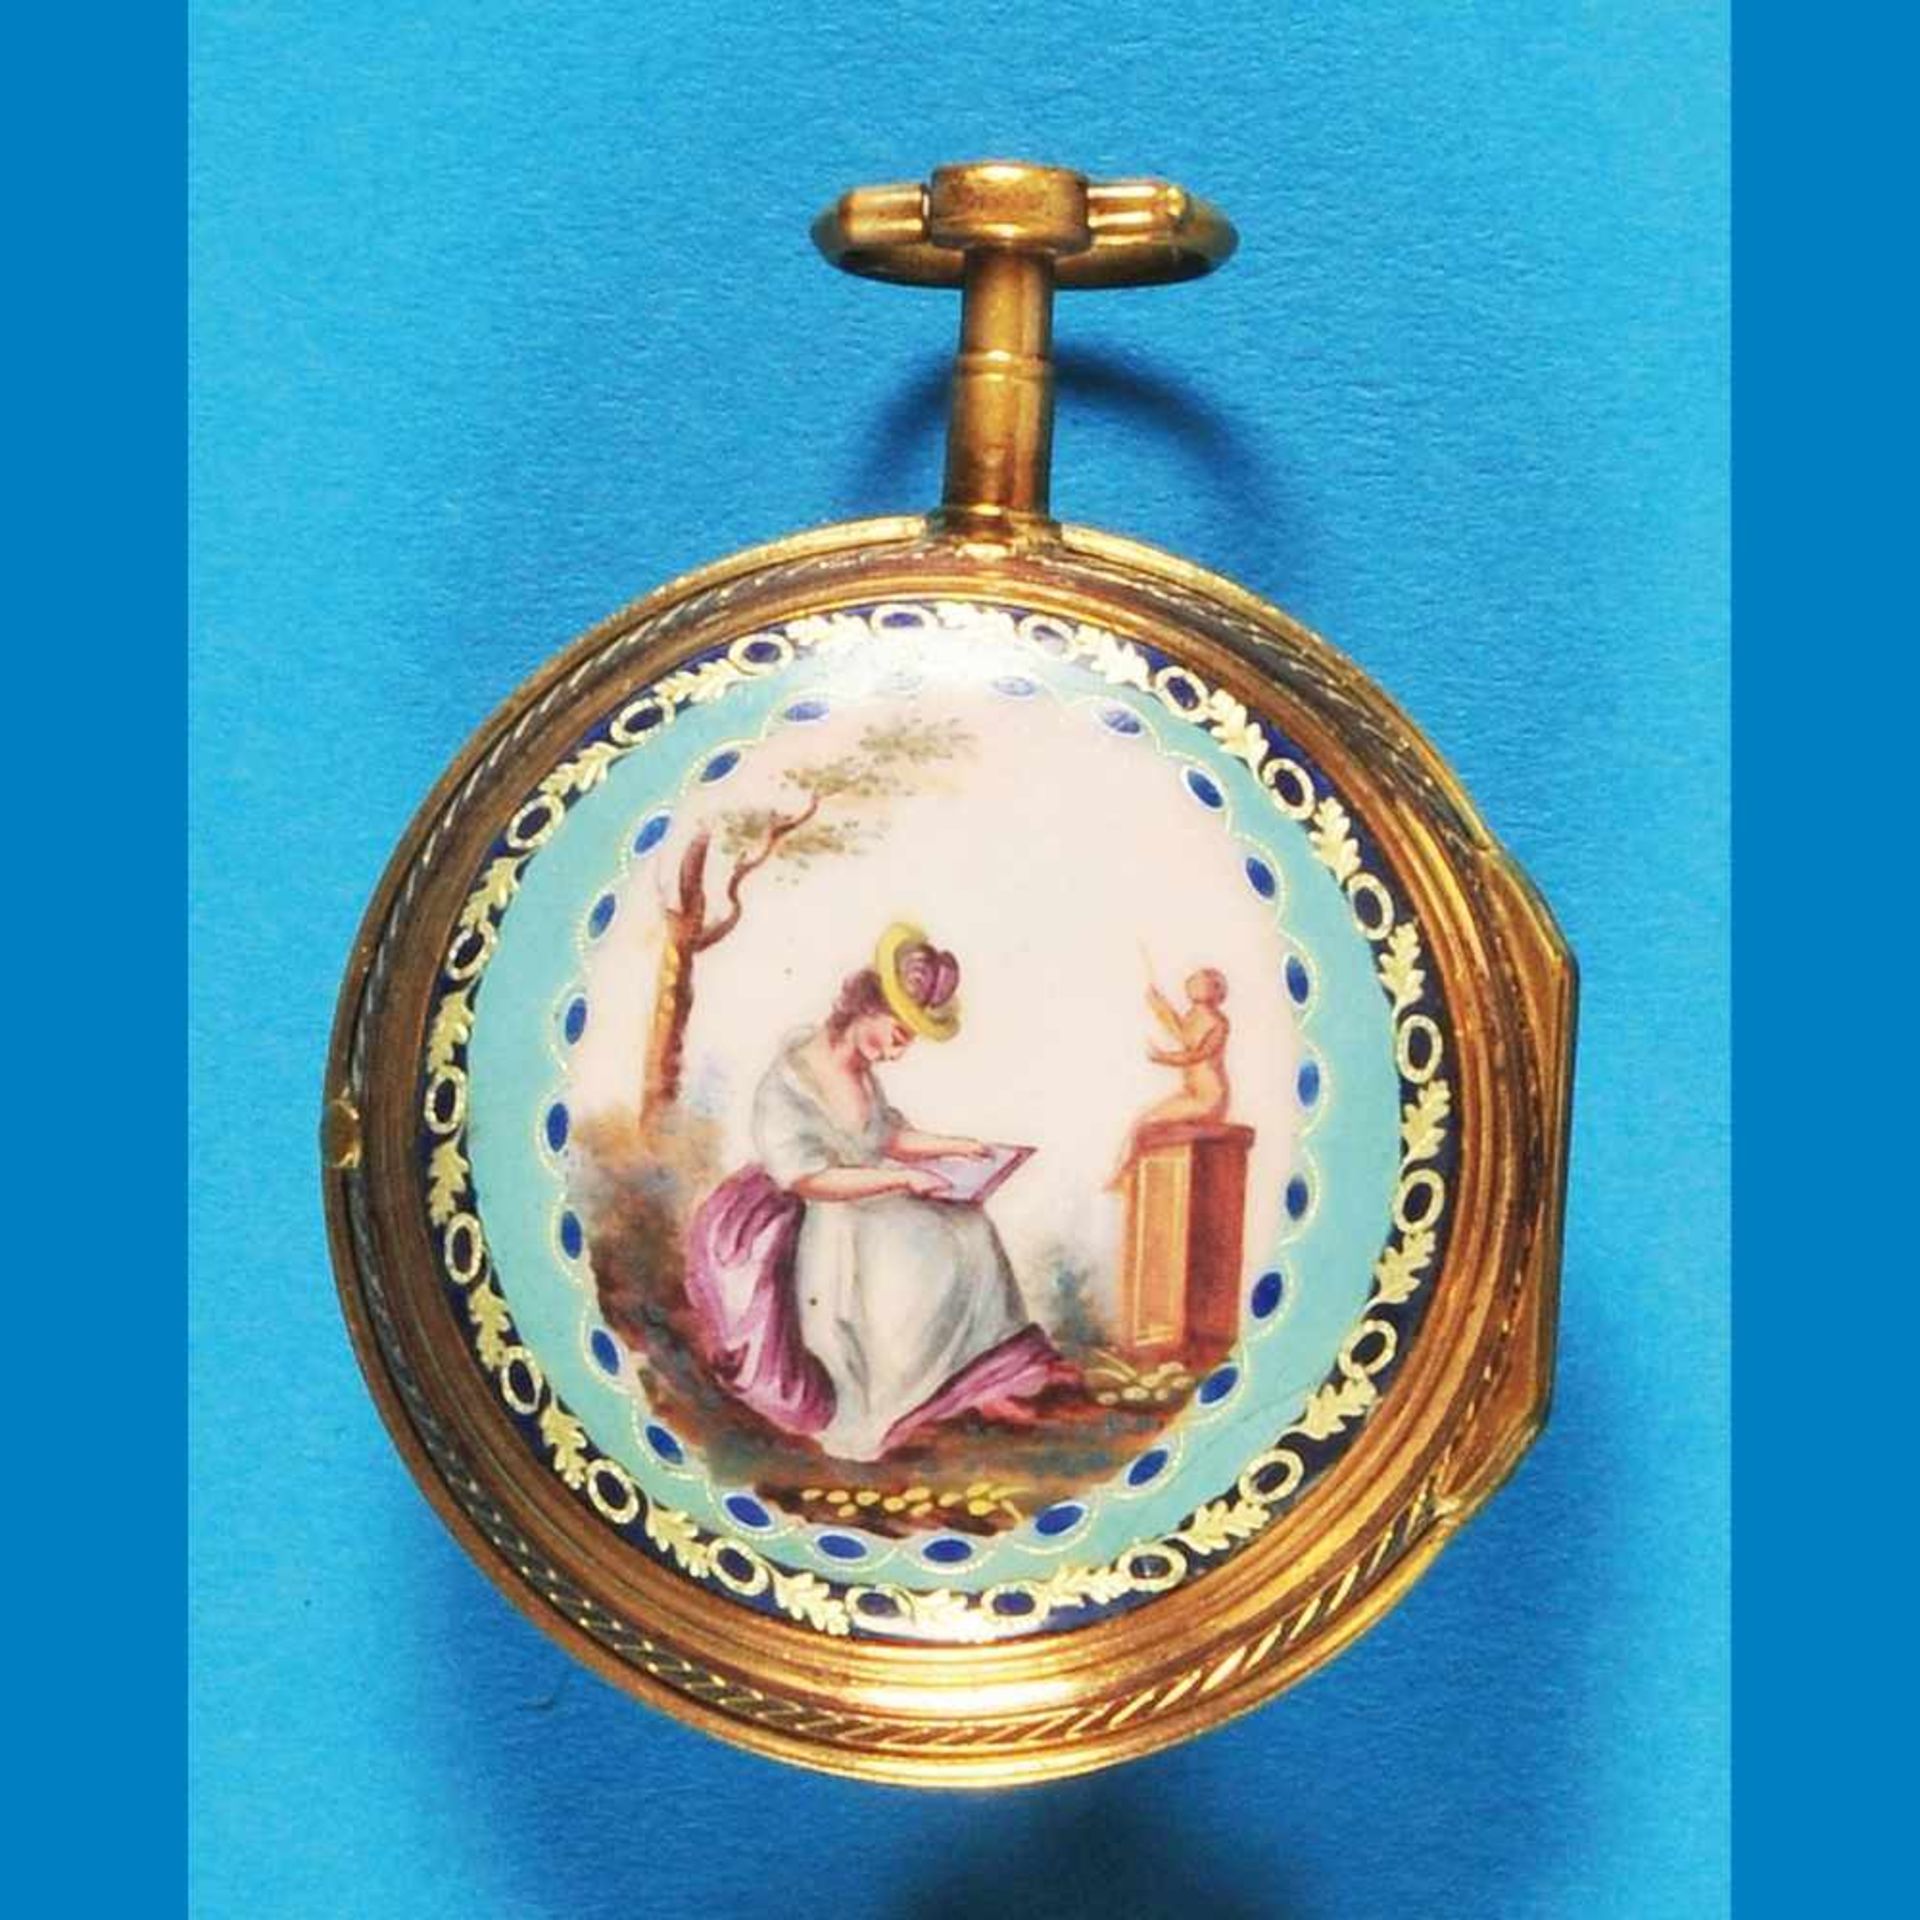 Gold-plated enamel spindle pocket watch, Marthey & Co. - Image 2 of 2